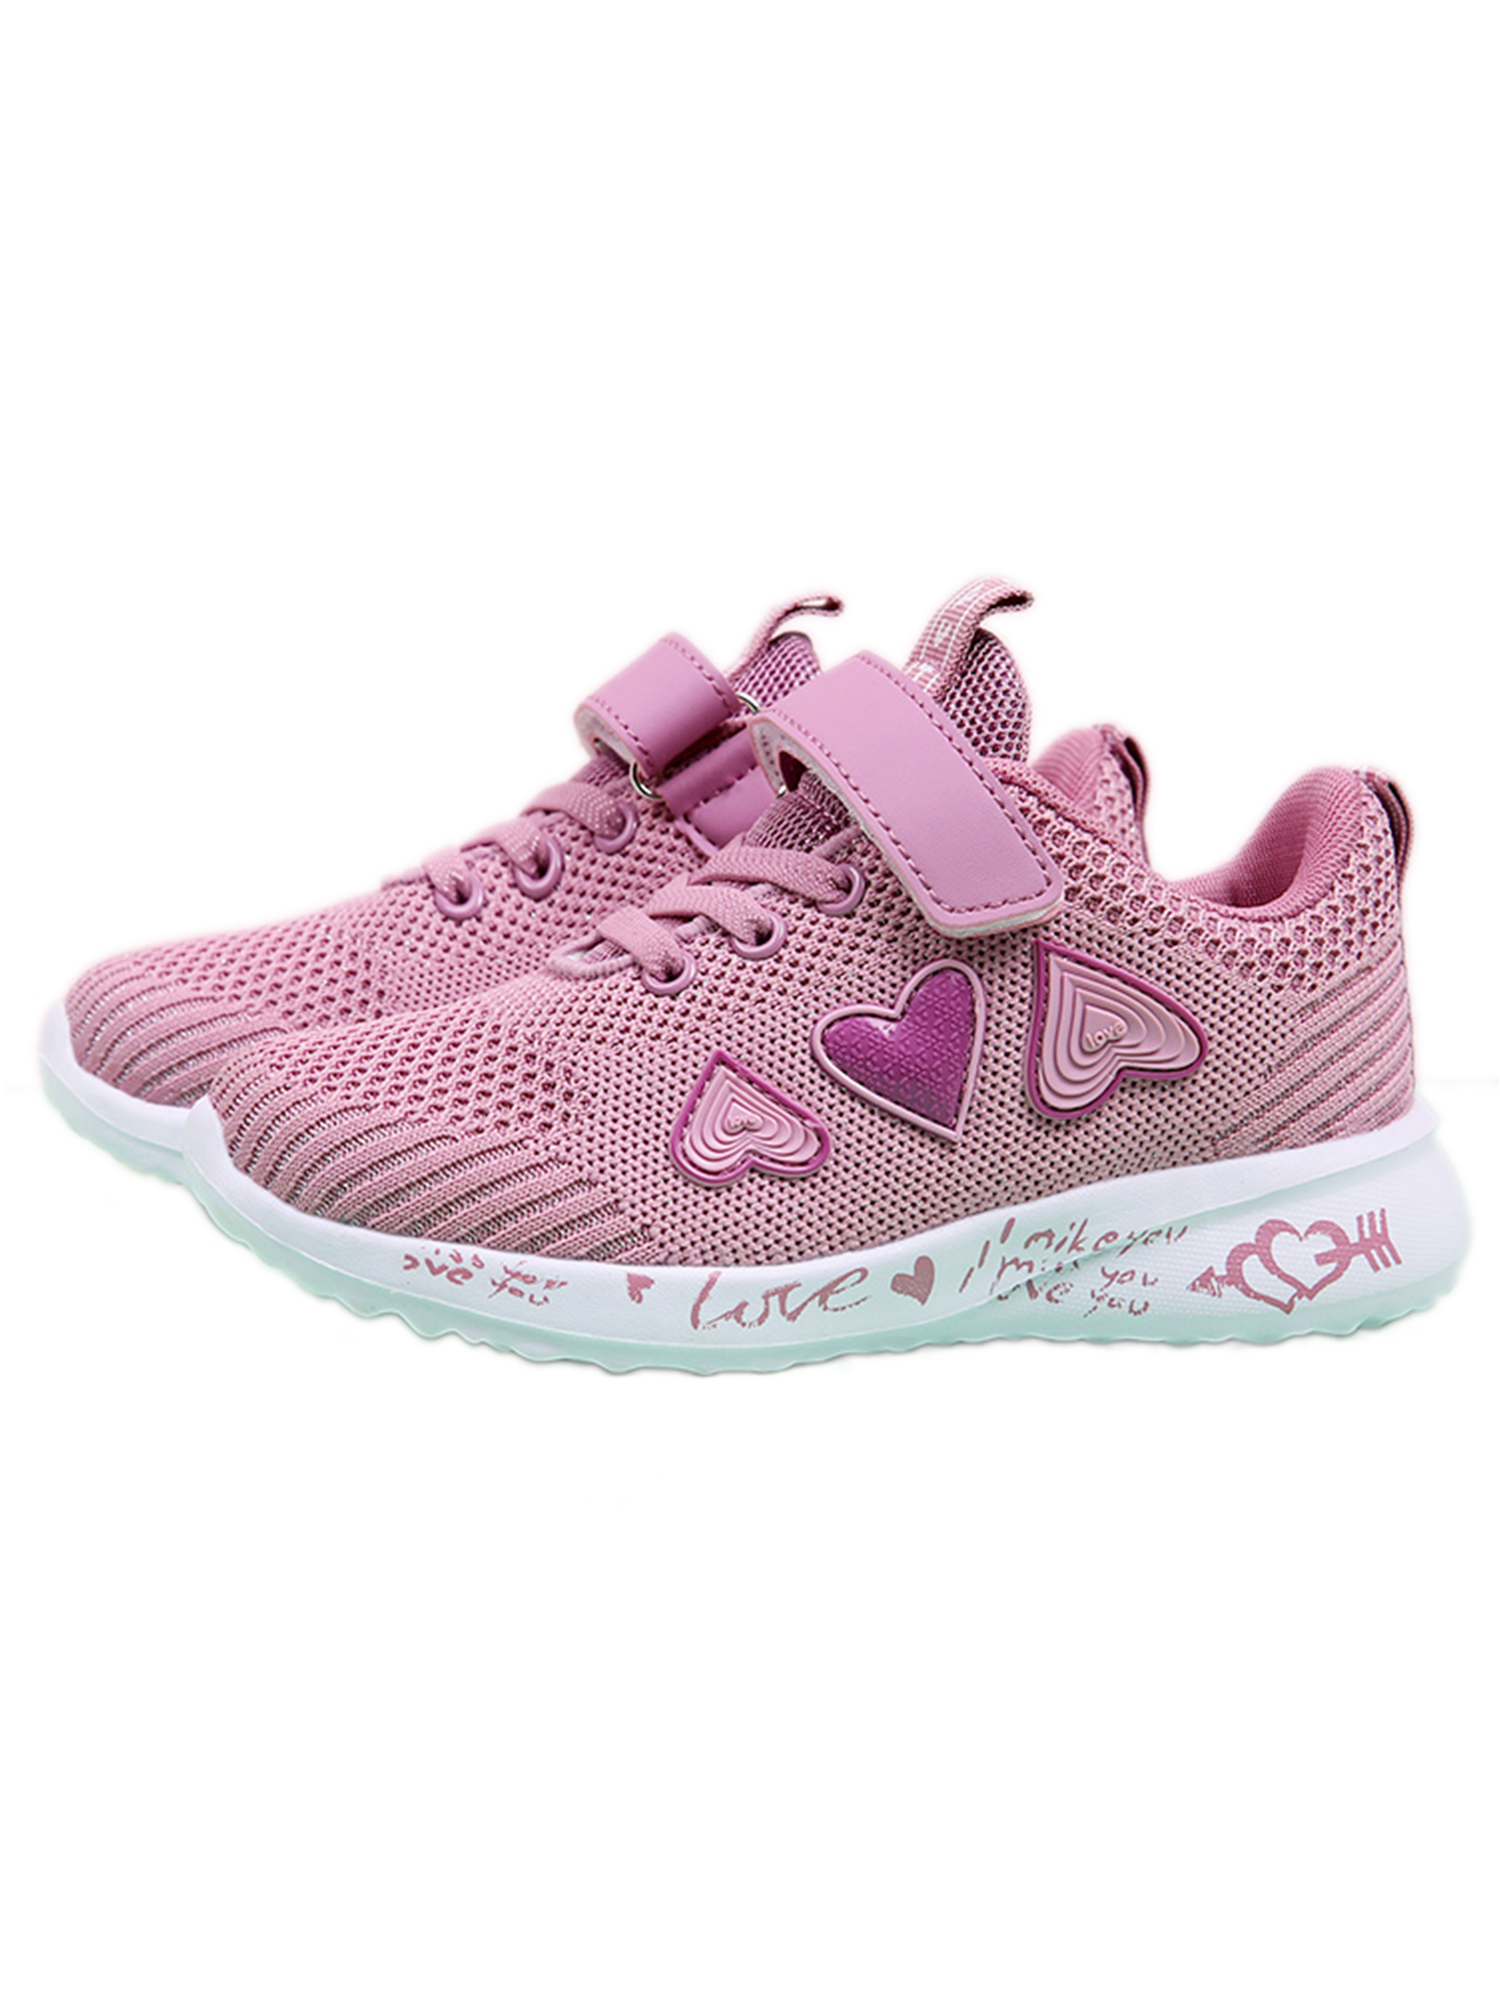 Tanleewa Lovely Girls Sports Shoes Kids Breathable Sneakers Lightweight Casual Shoe Size 1 - image 5 of 7